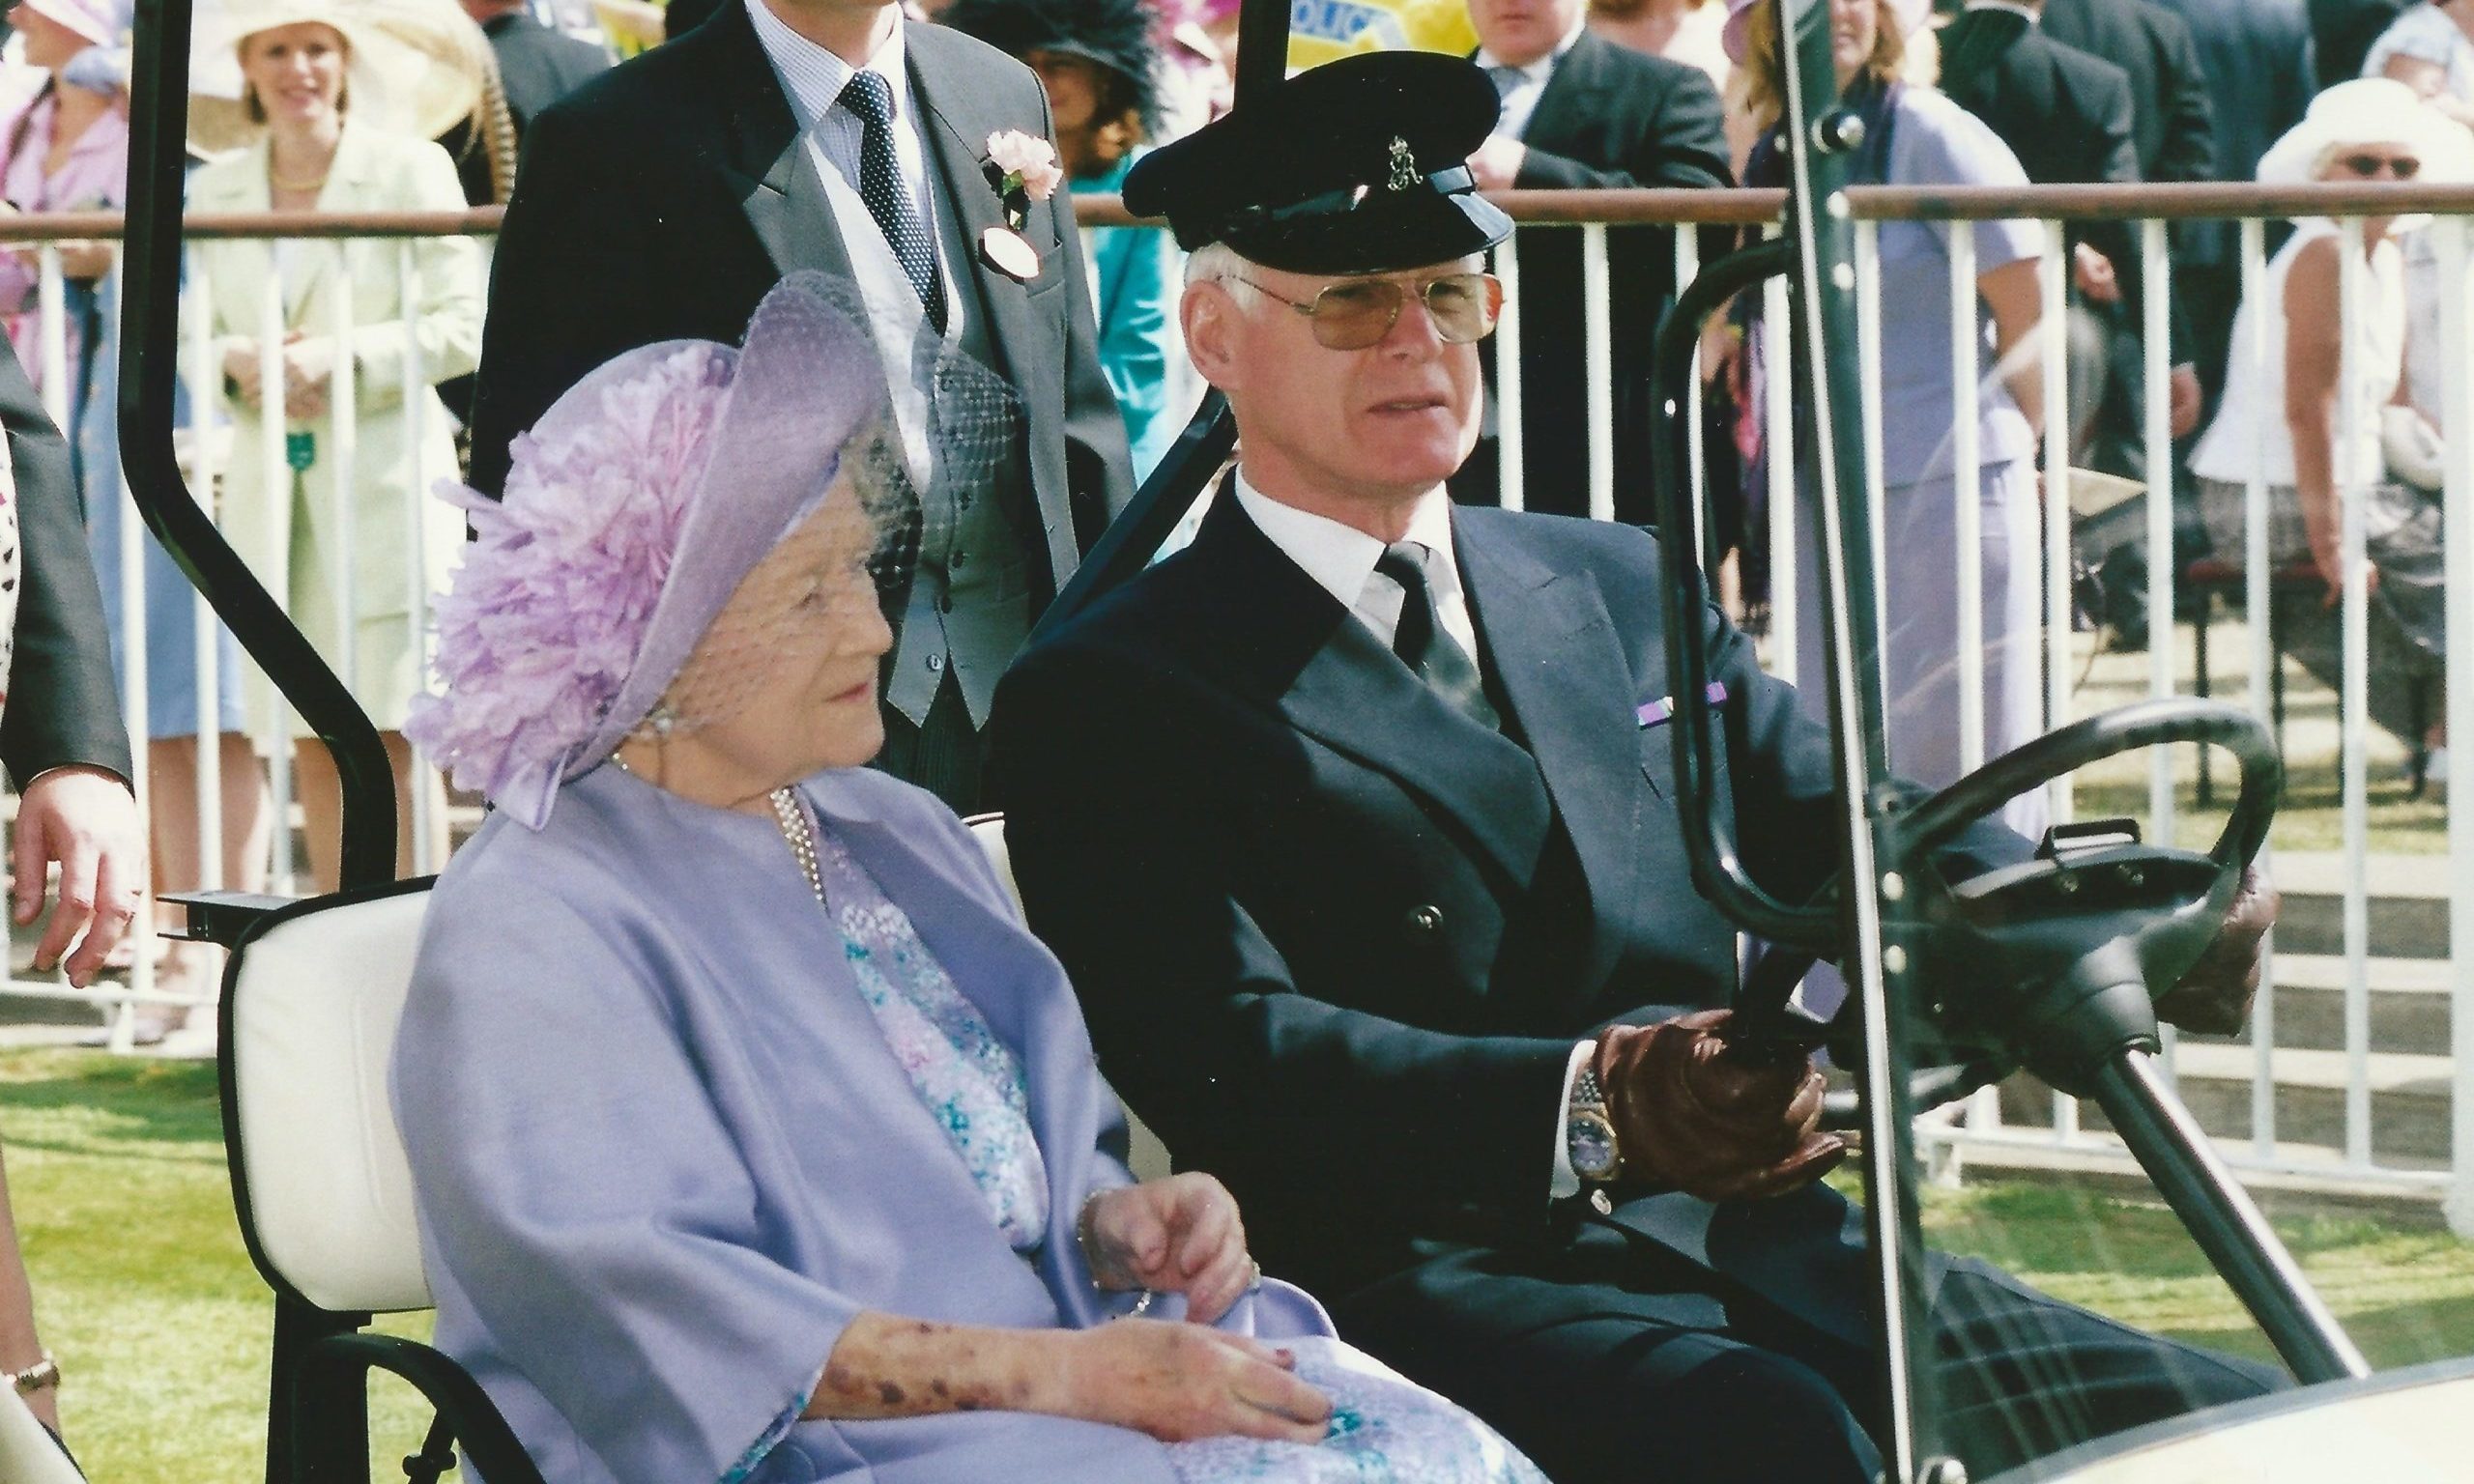 Arthur Barty was chauffeur to the Queen Mother for 27 years.